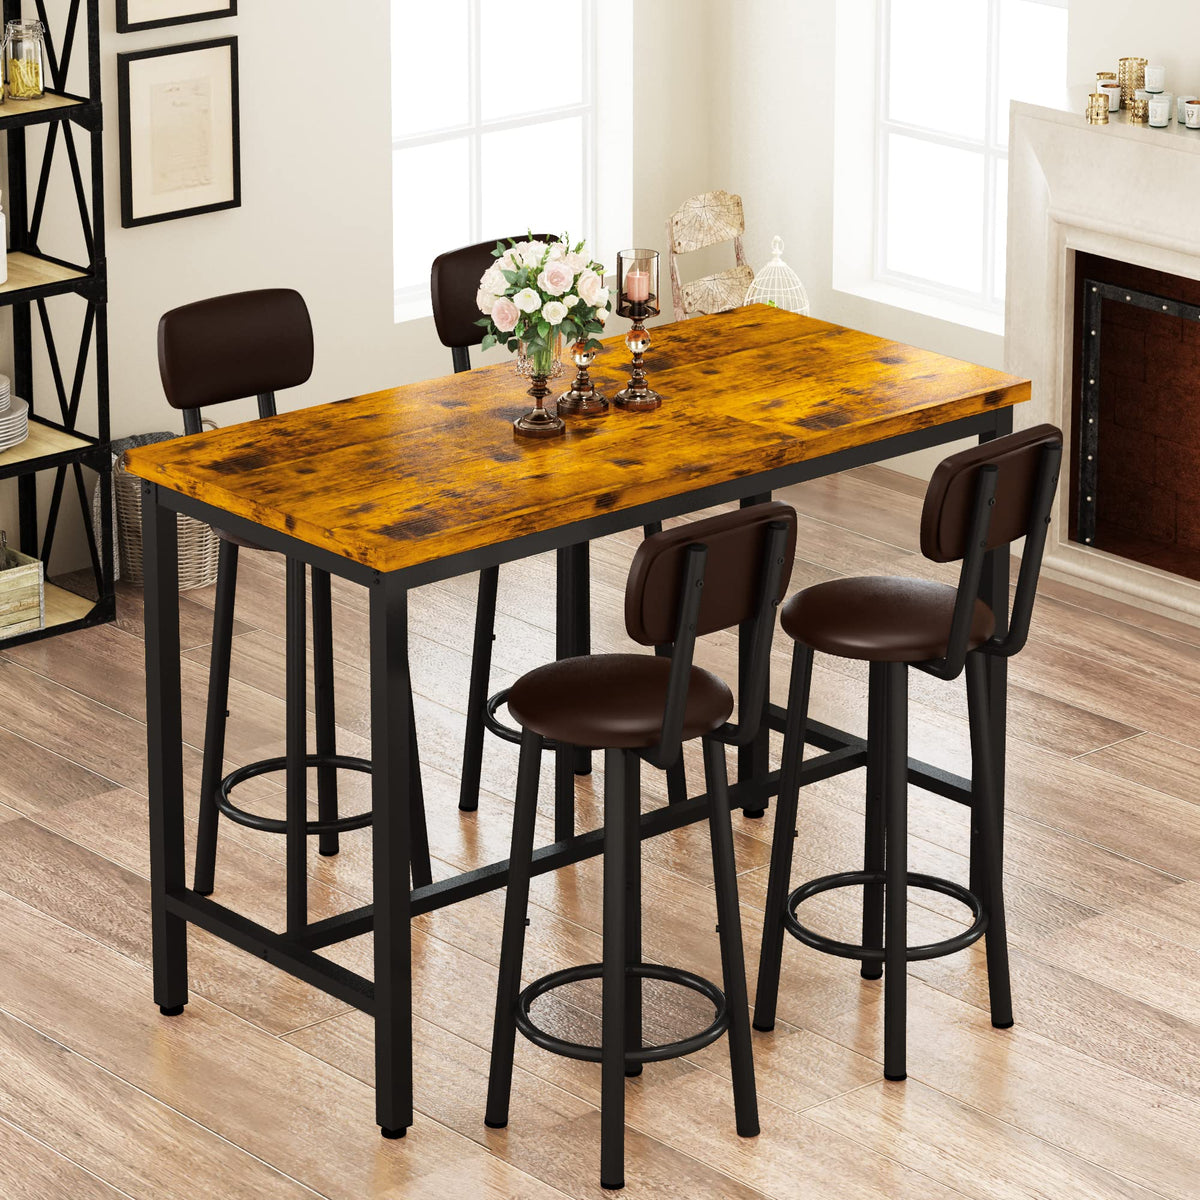 AWQM Bar Table and 4 Chairs Set Industrial Counter Height Pub Table with Bar 5 Pieces Dining Set Home Kitchen Breakfast, PU Upholstered Stools with Backrest, Rustic Brown